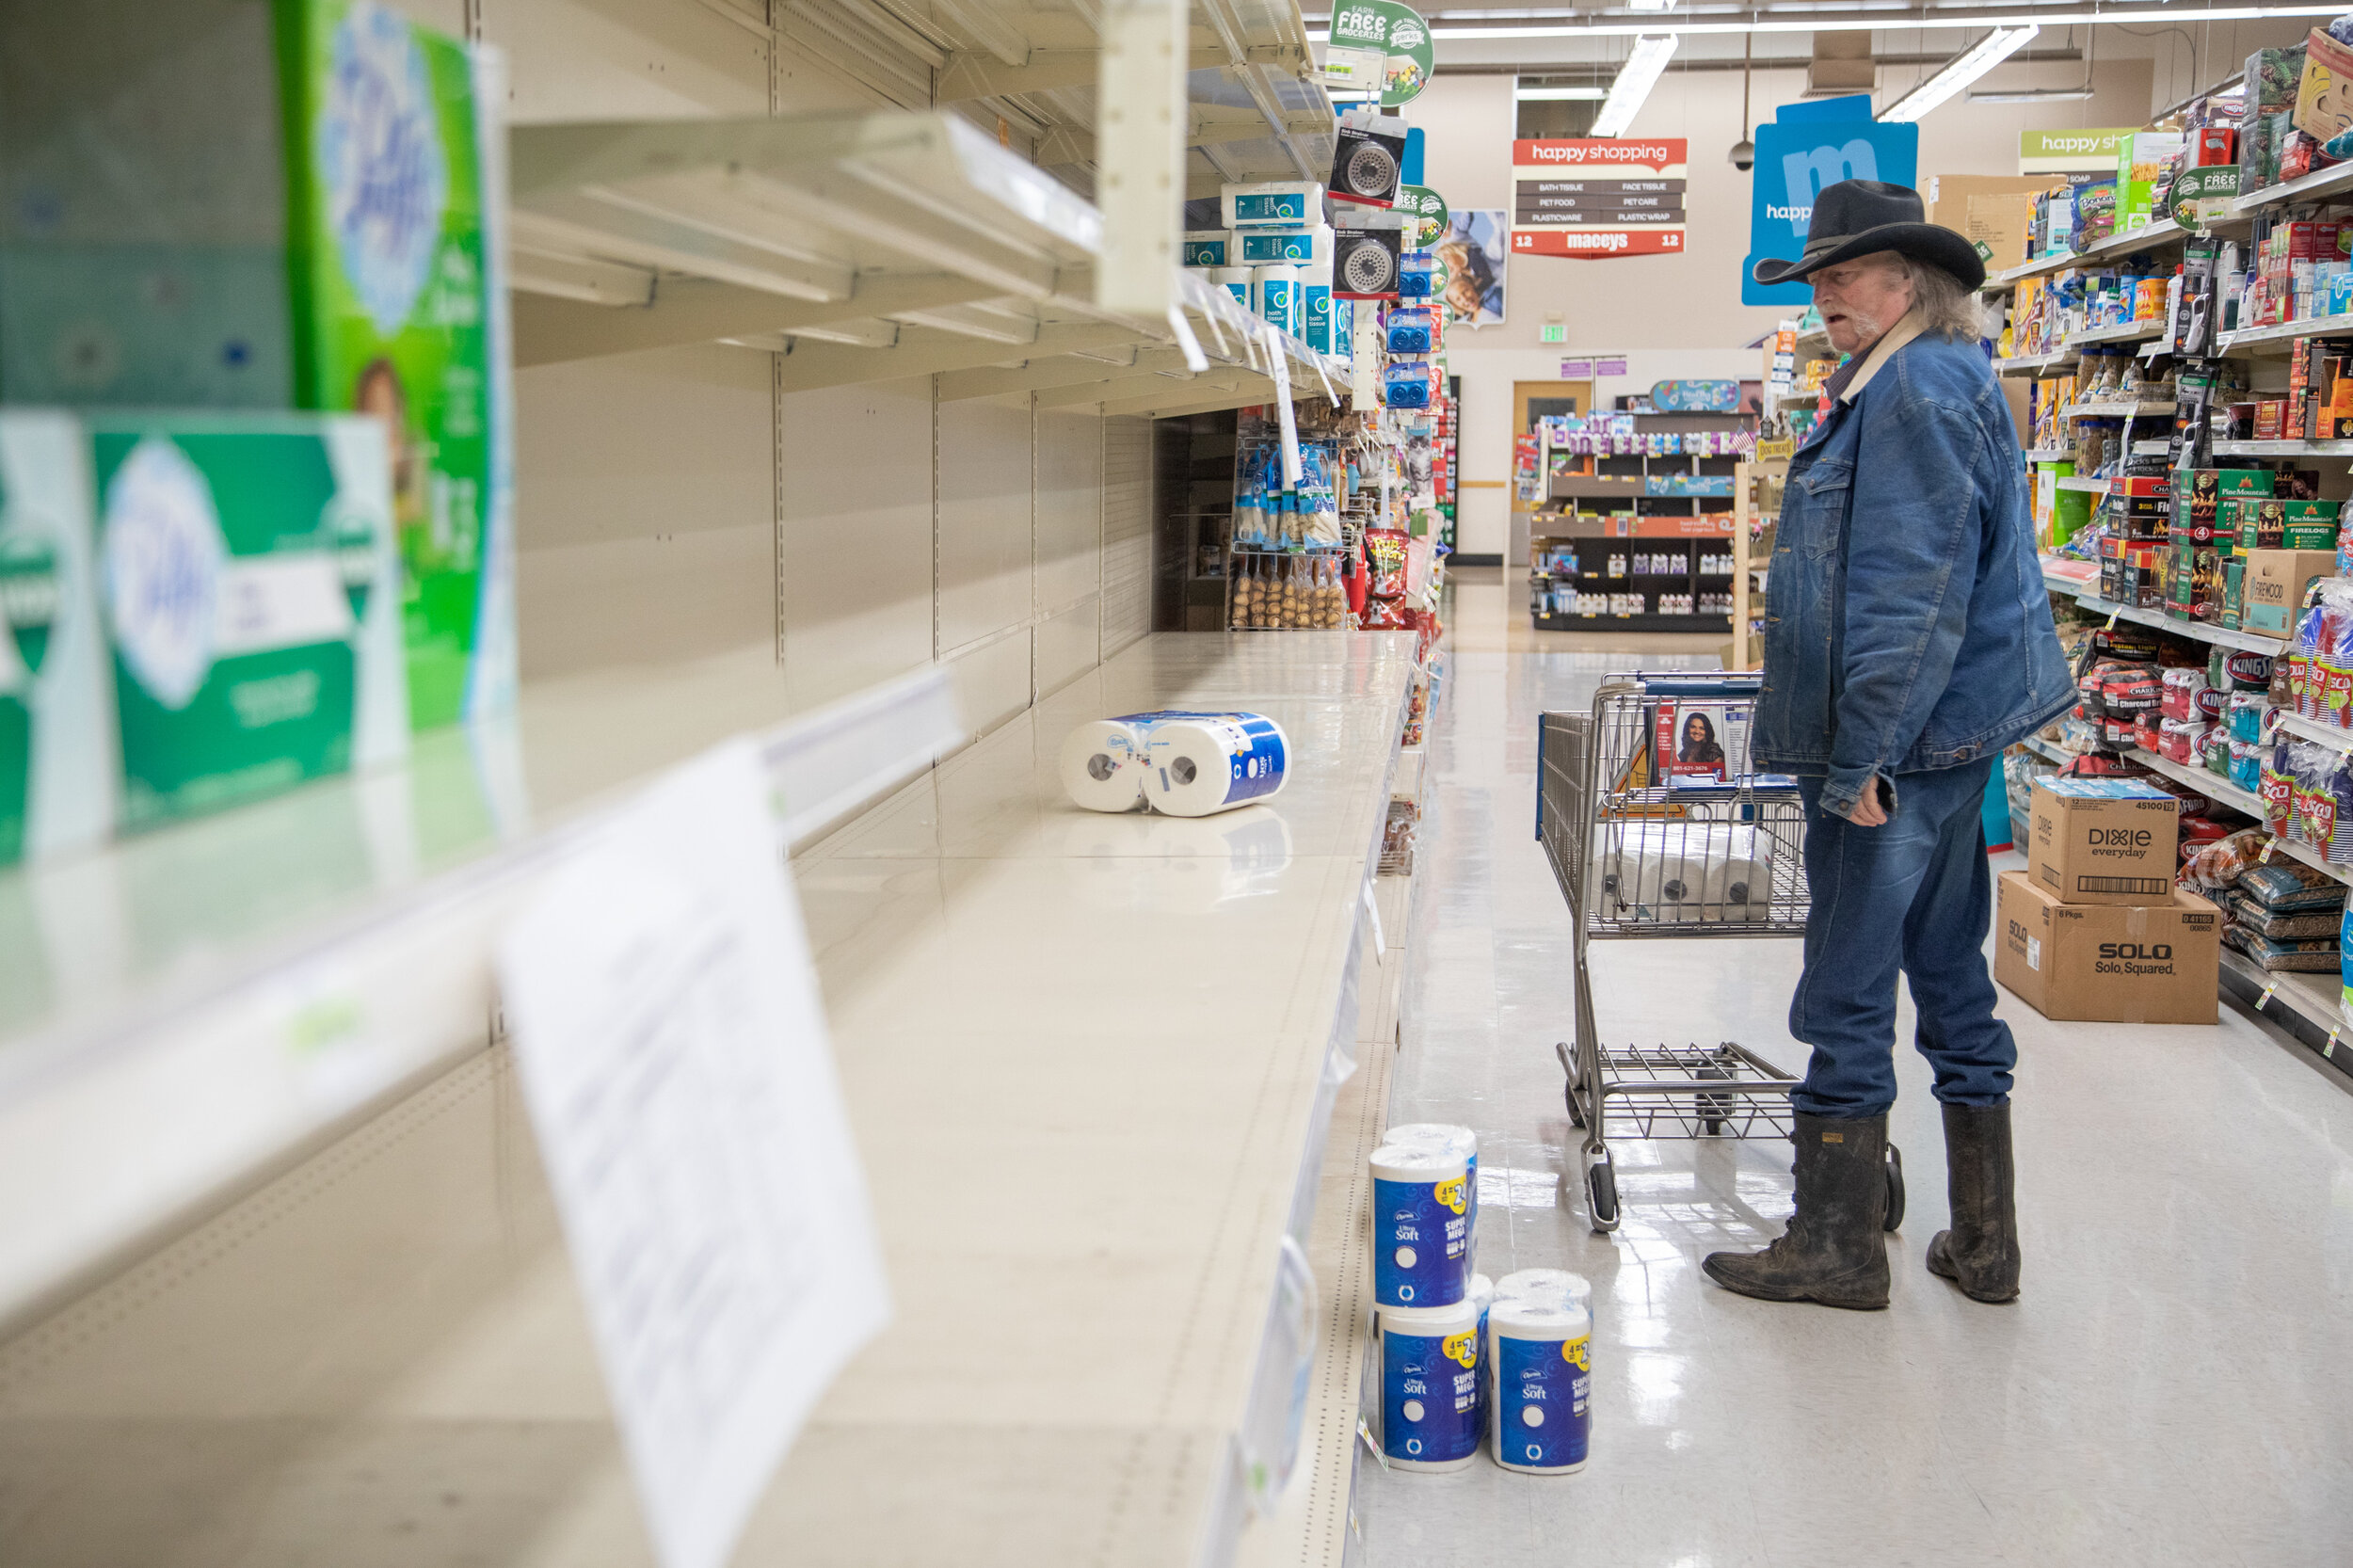  Ed Packer shops just after 8 a.m. on Friday, March 20, 2020, at Macey’s on 36th Street in South Ogden. Associated Food Stores have opened all their locations an hour before the general public to anyone 60 years or older in response to the coronaviru